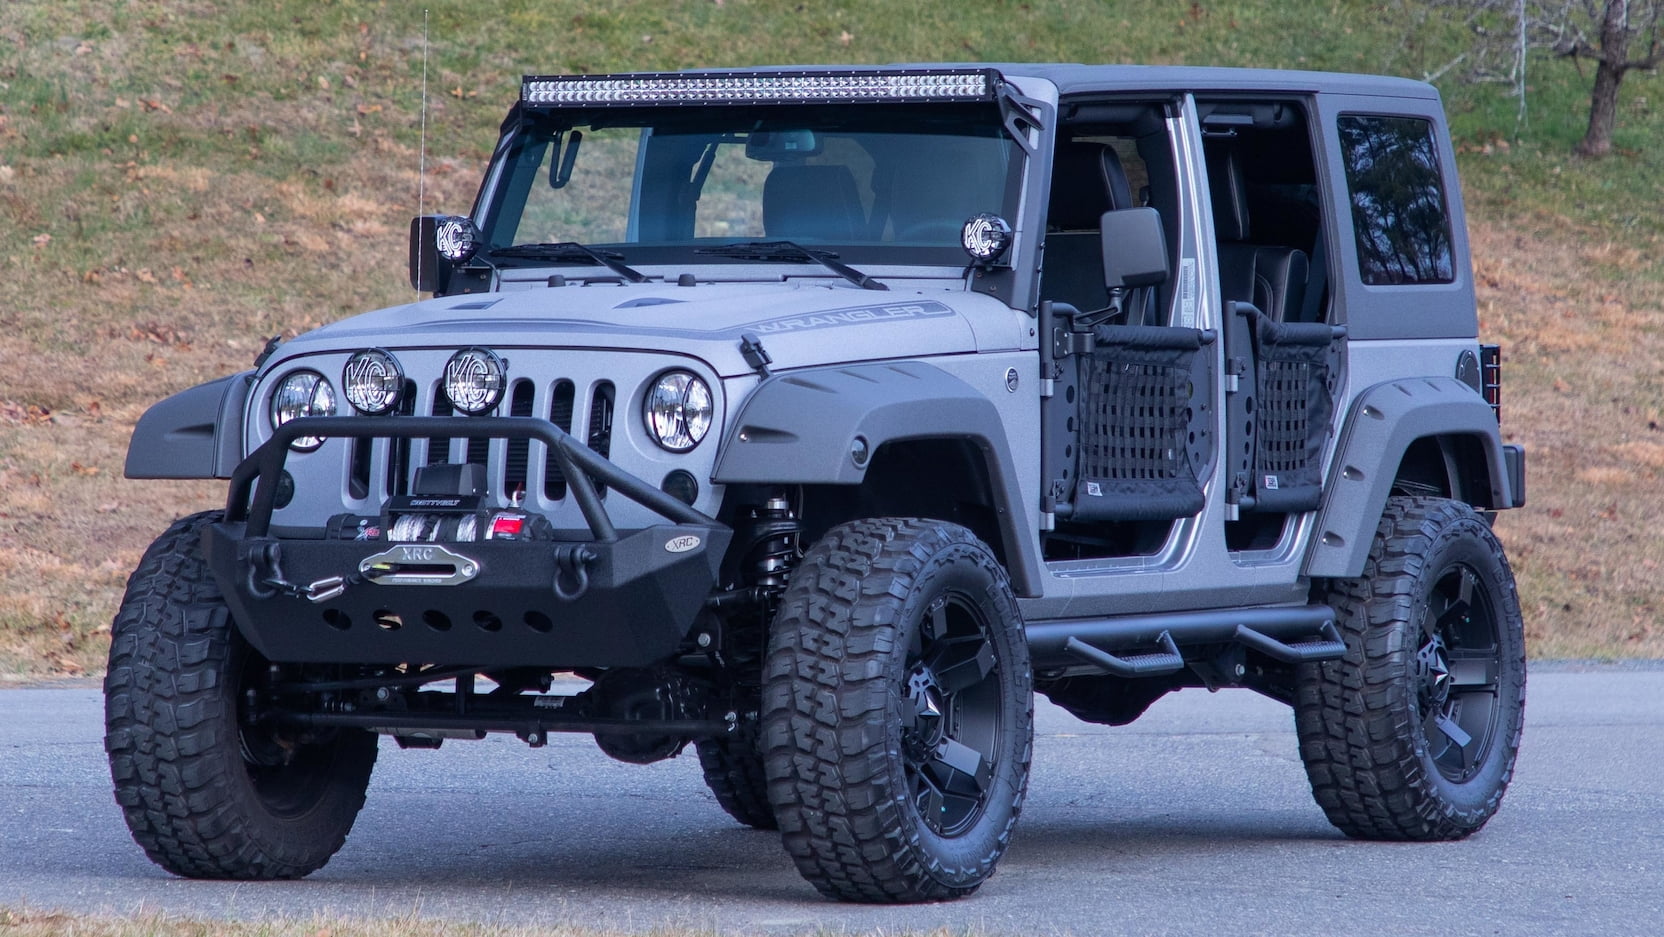 2015 Jeep Wrangler Unlimited | V66 | The Eddie Vannoy Collection 2020